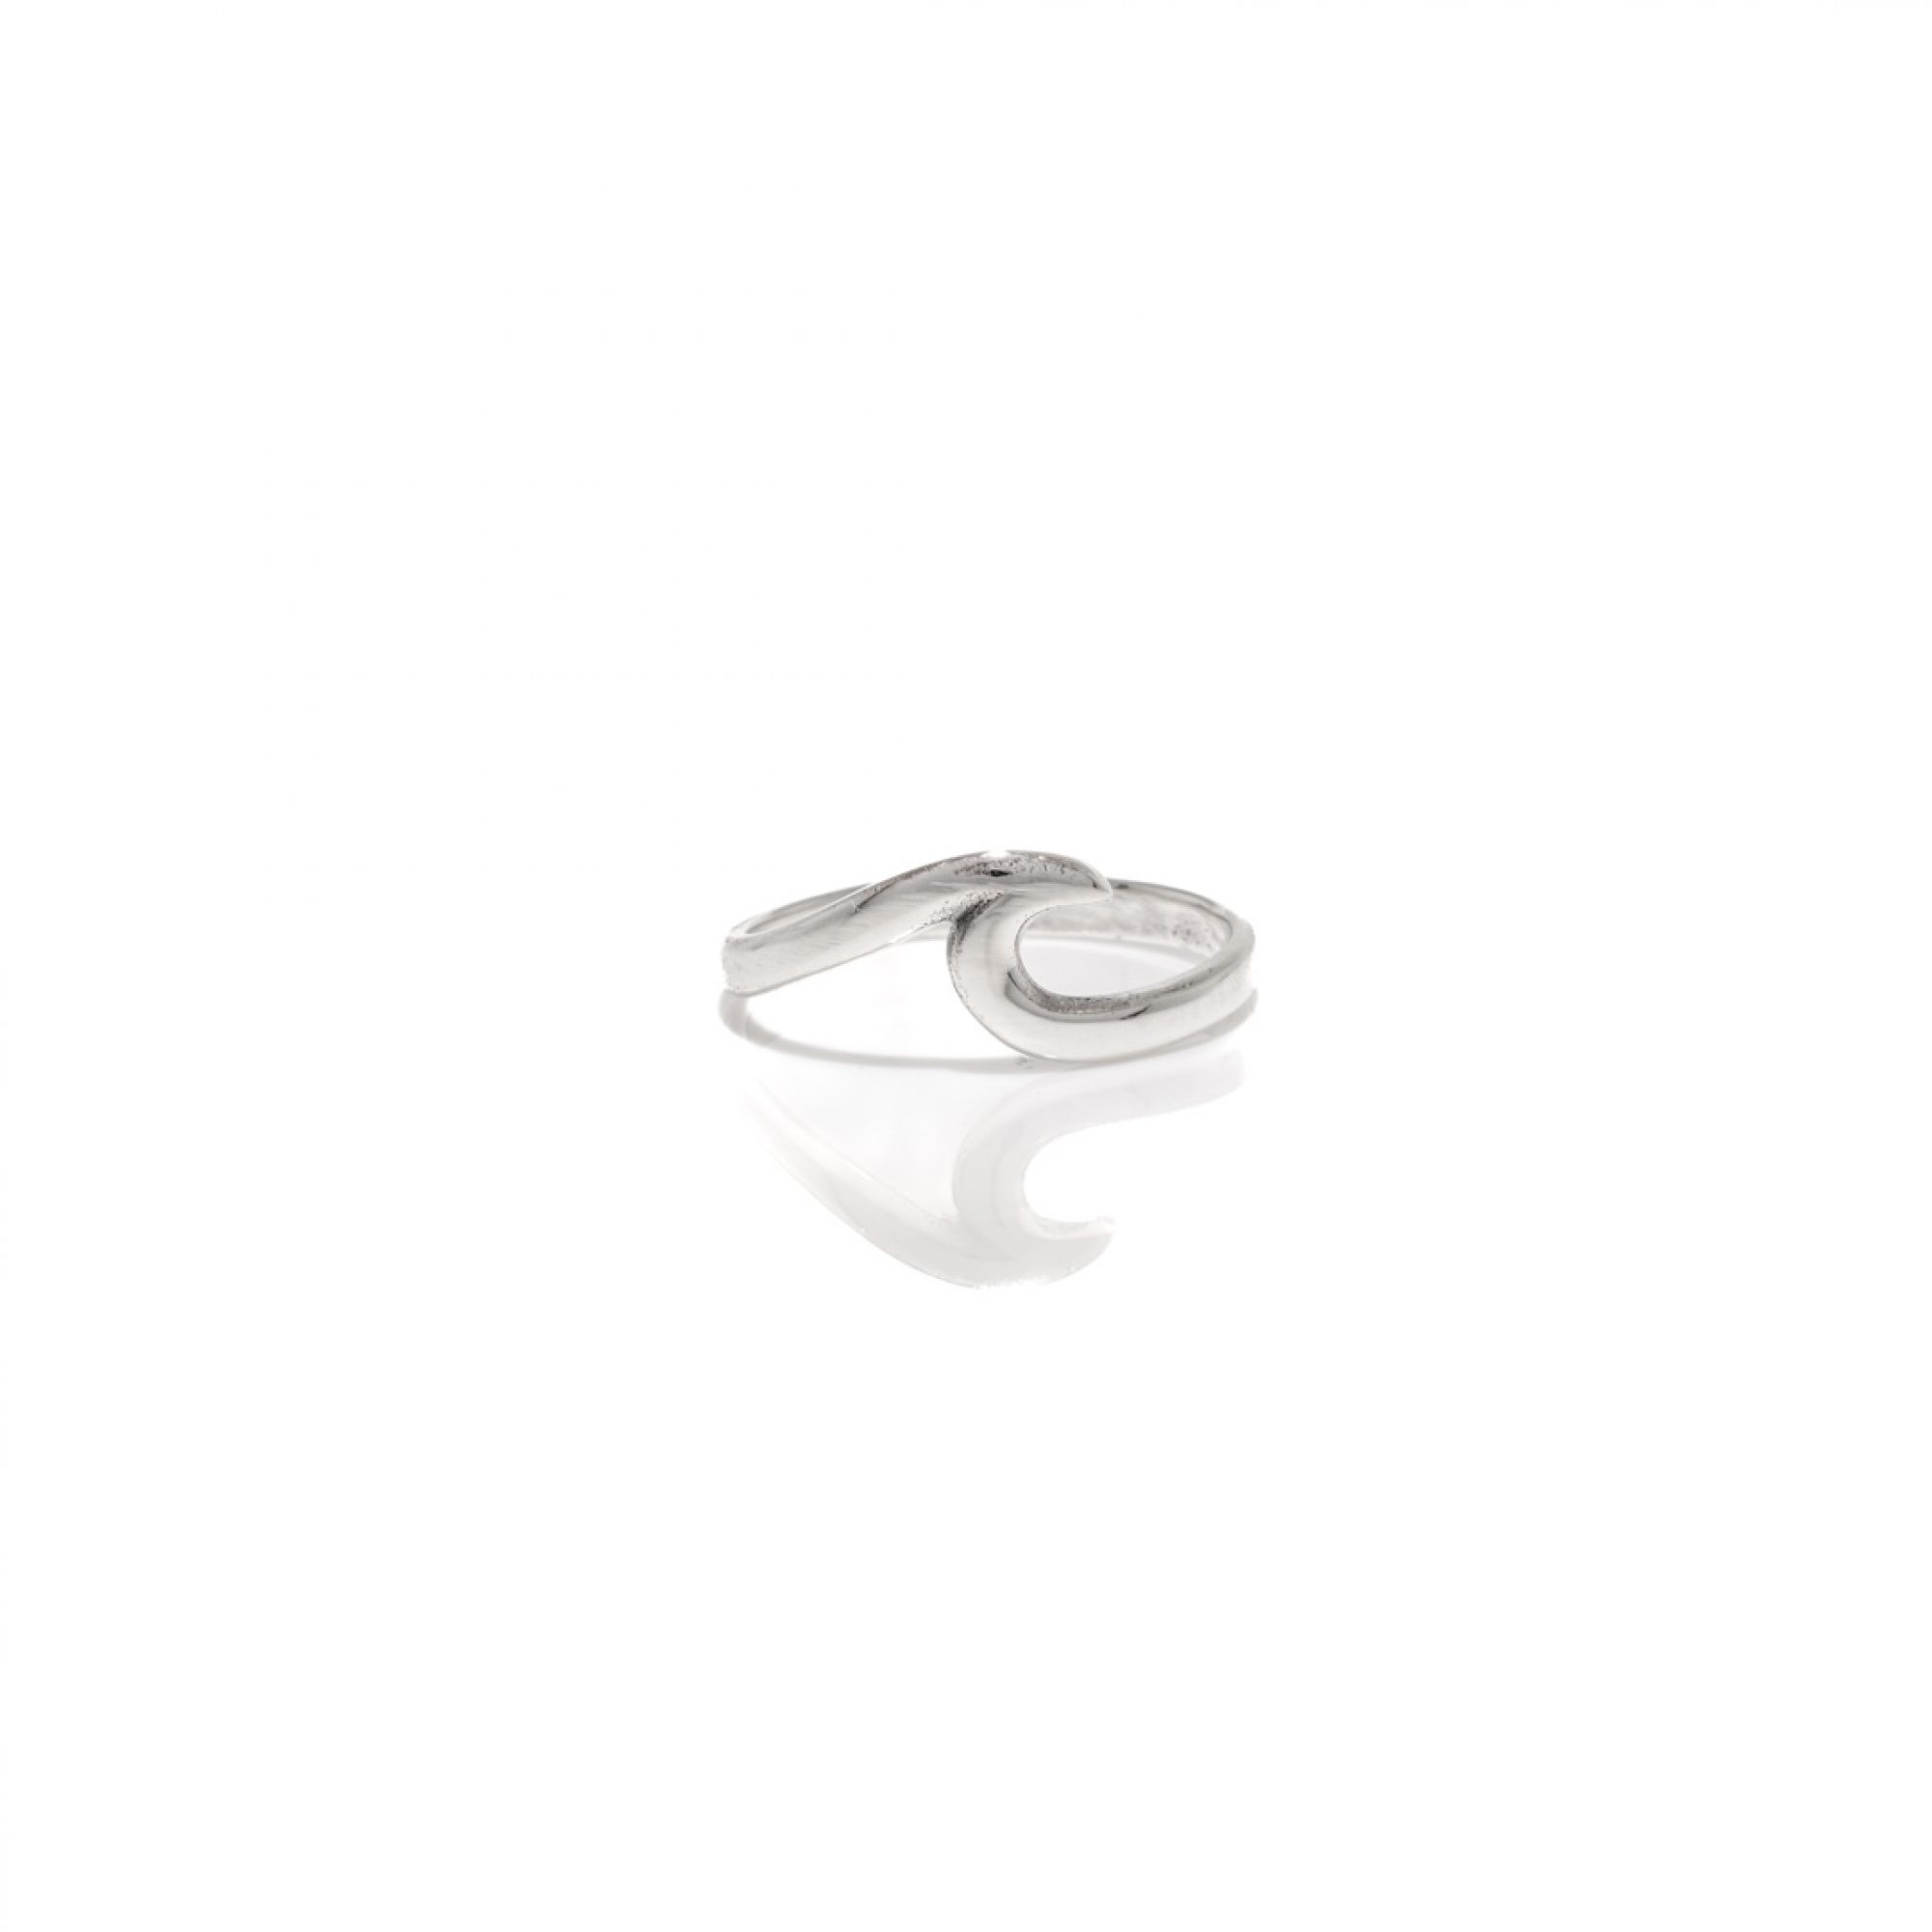 Silver ring with wave